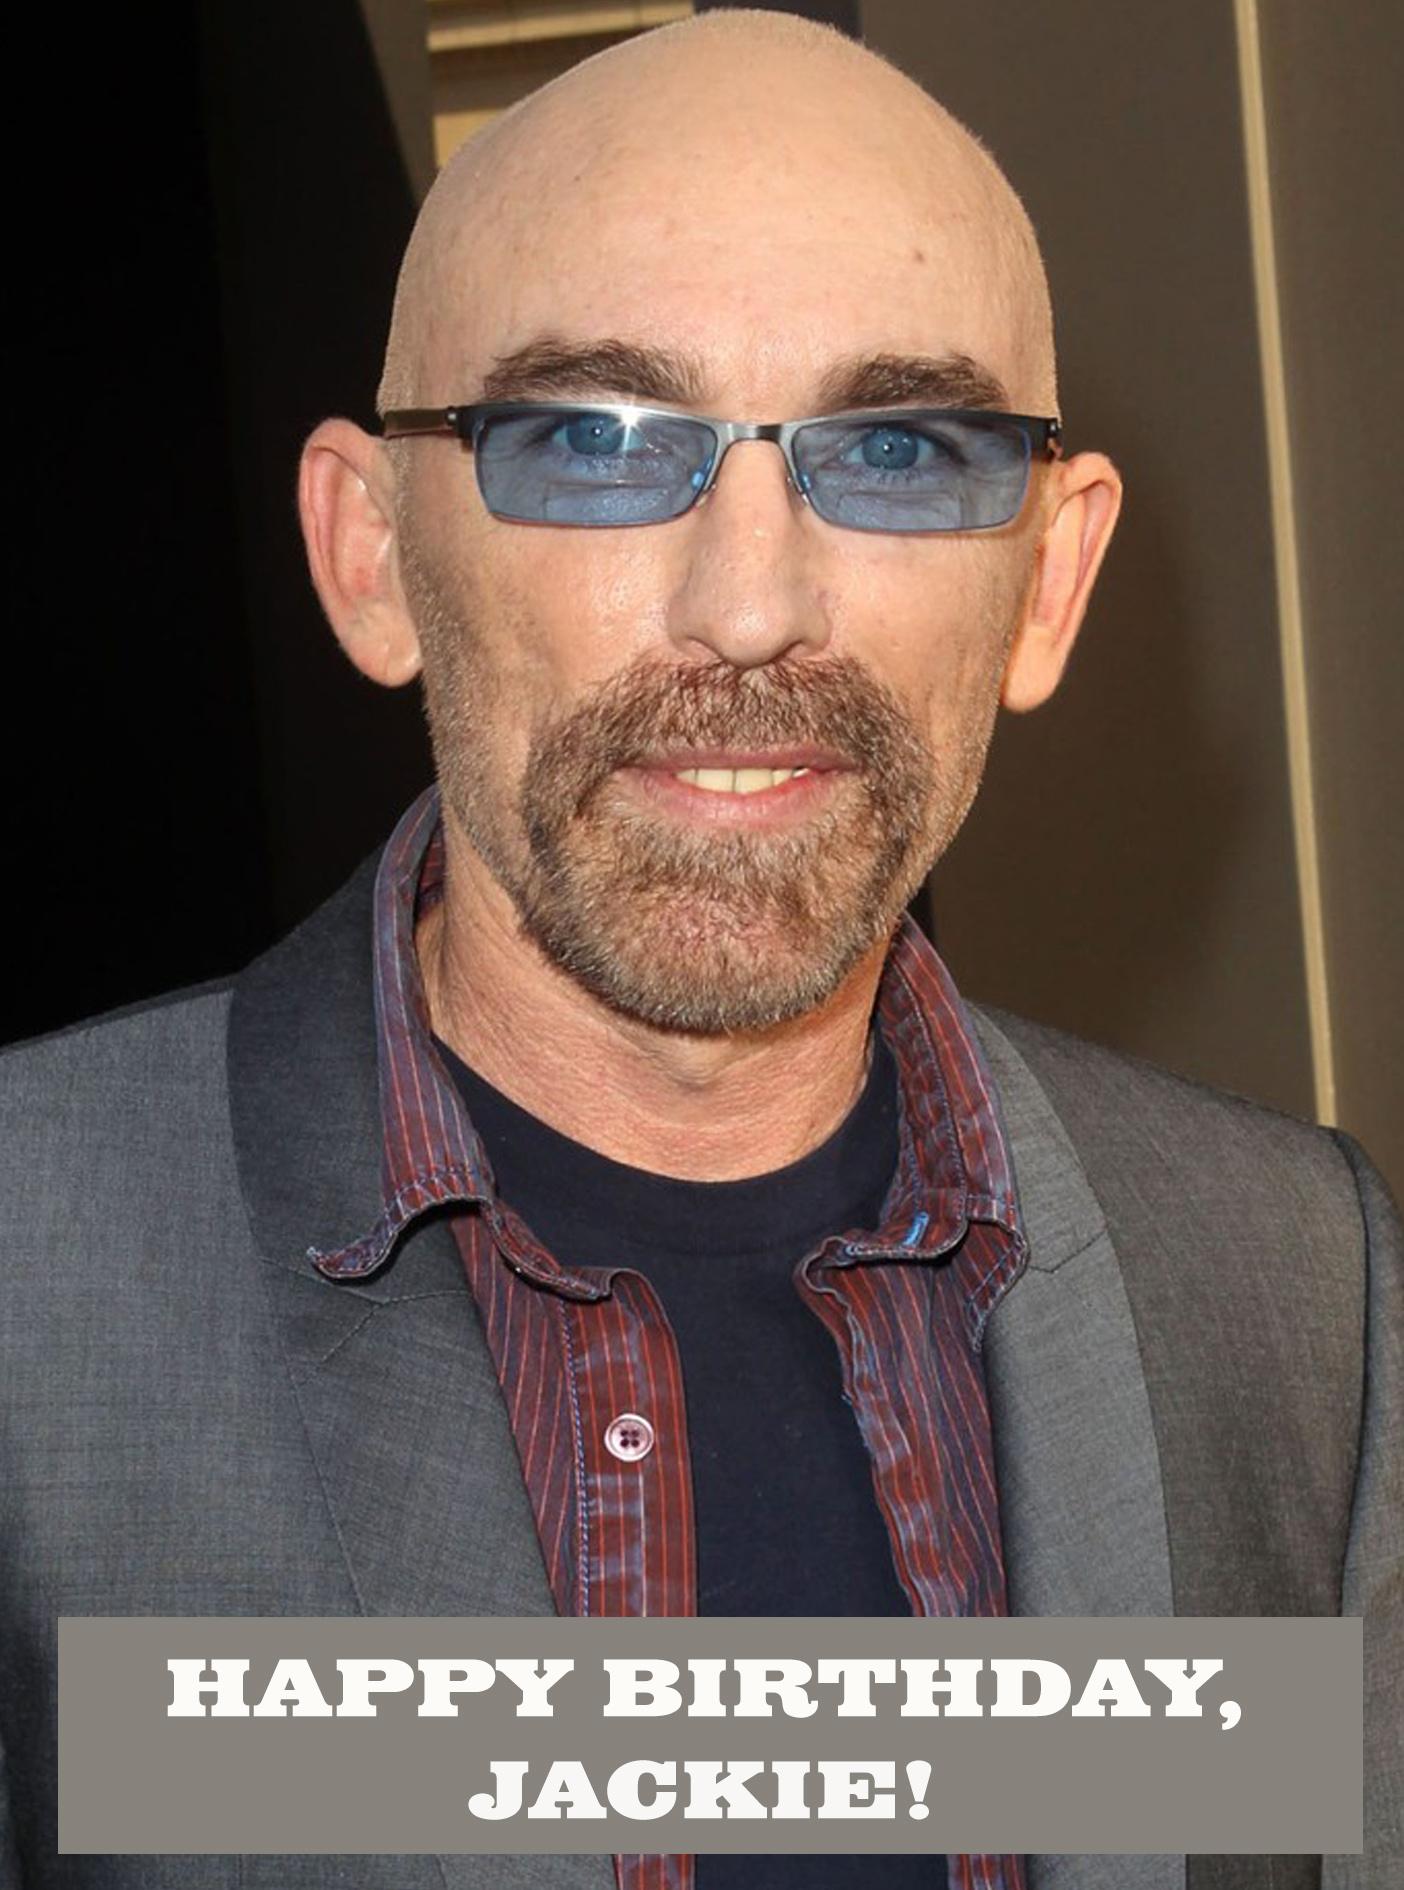 Wishing Jackie Earle Haley a Happy Birthday. Rorschach is still one of our favorite characters from Watchmen . 